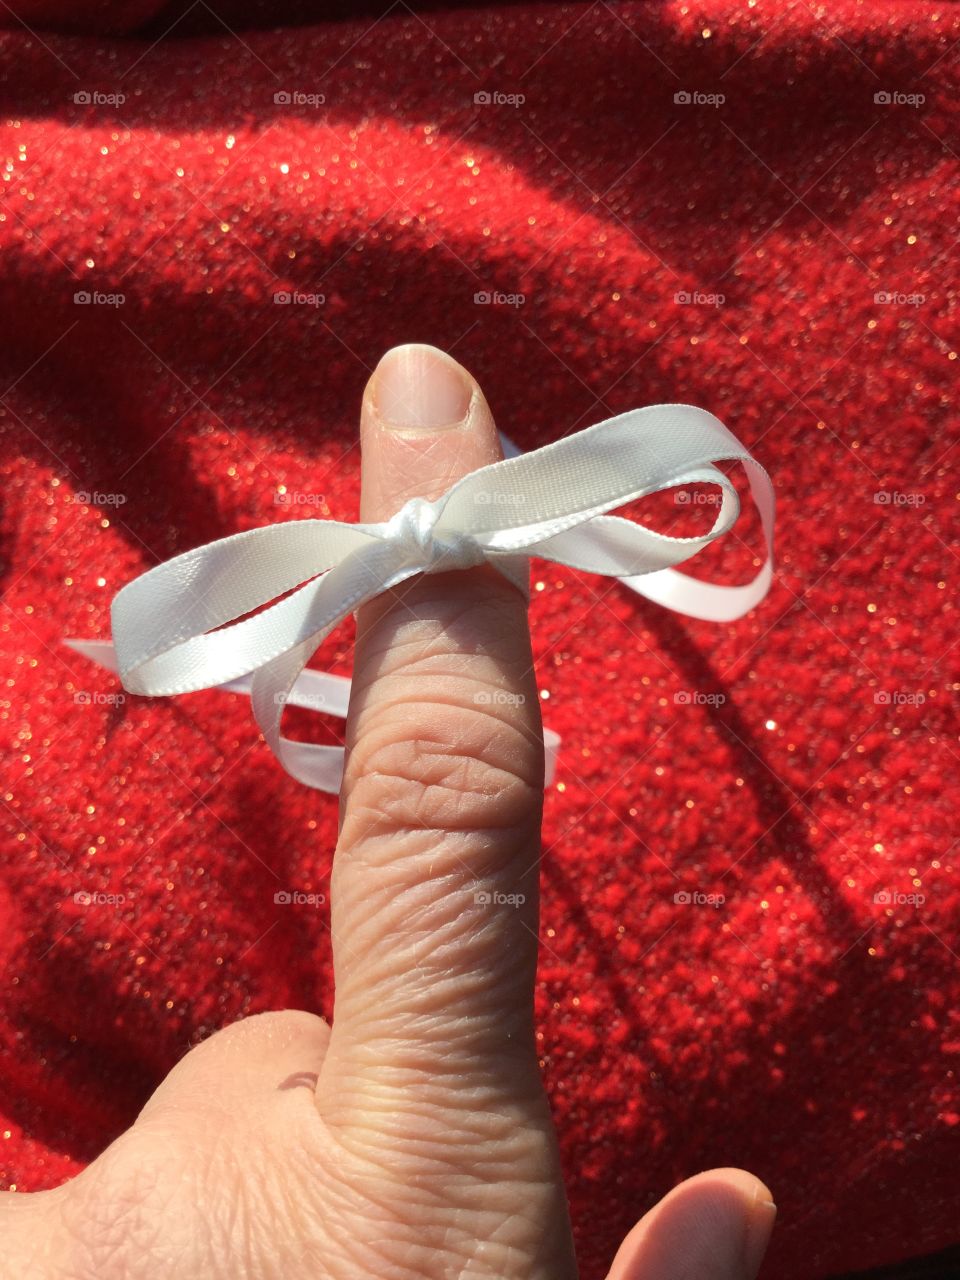 Tying the knot. Finger with white satin ribbon in a knot.